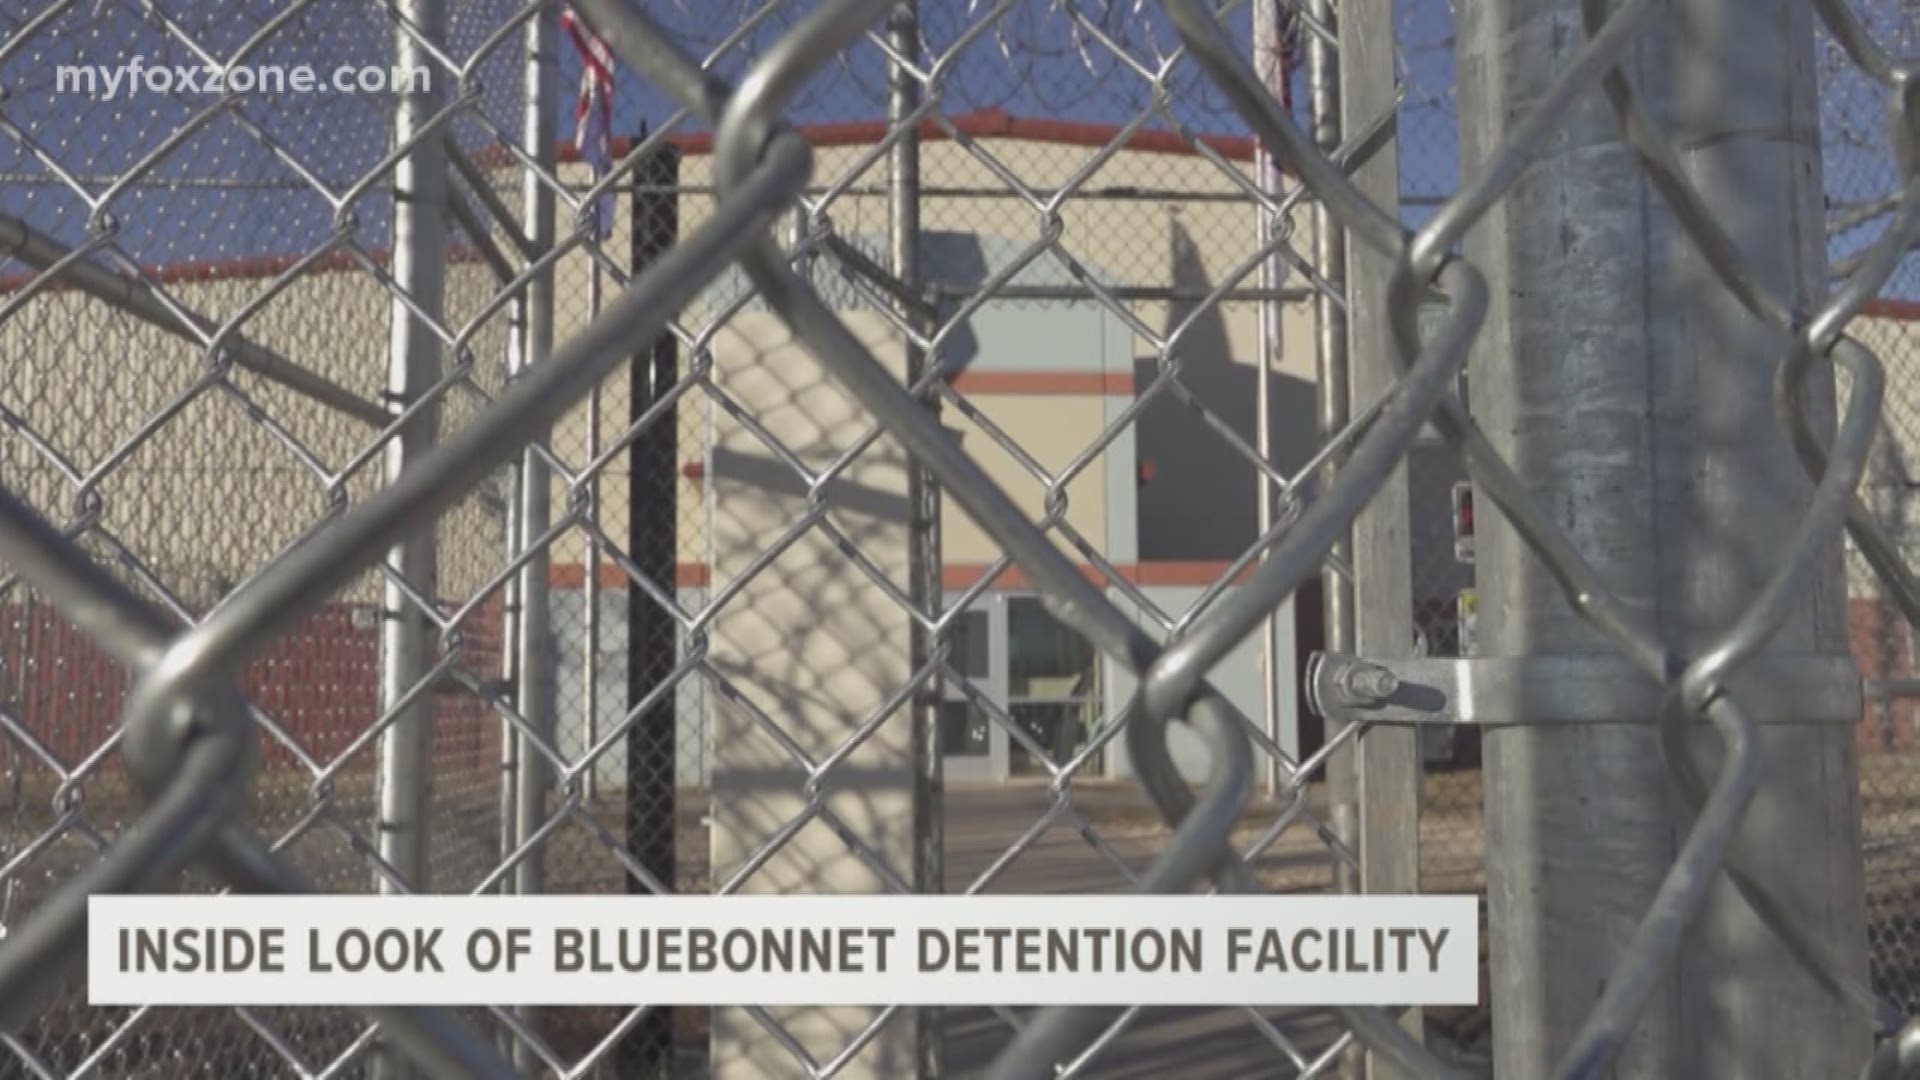 ICE gave a media tour over their newest detention facility in West Texas.